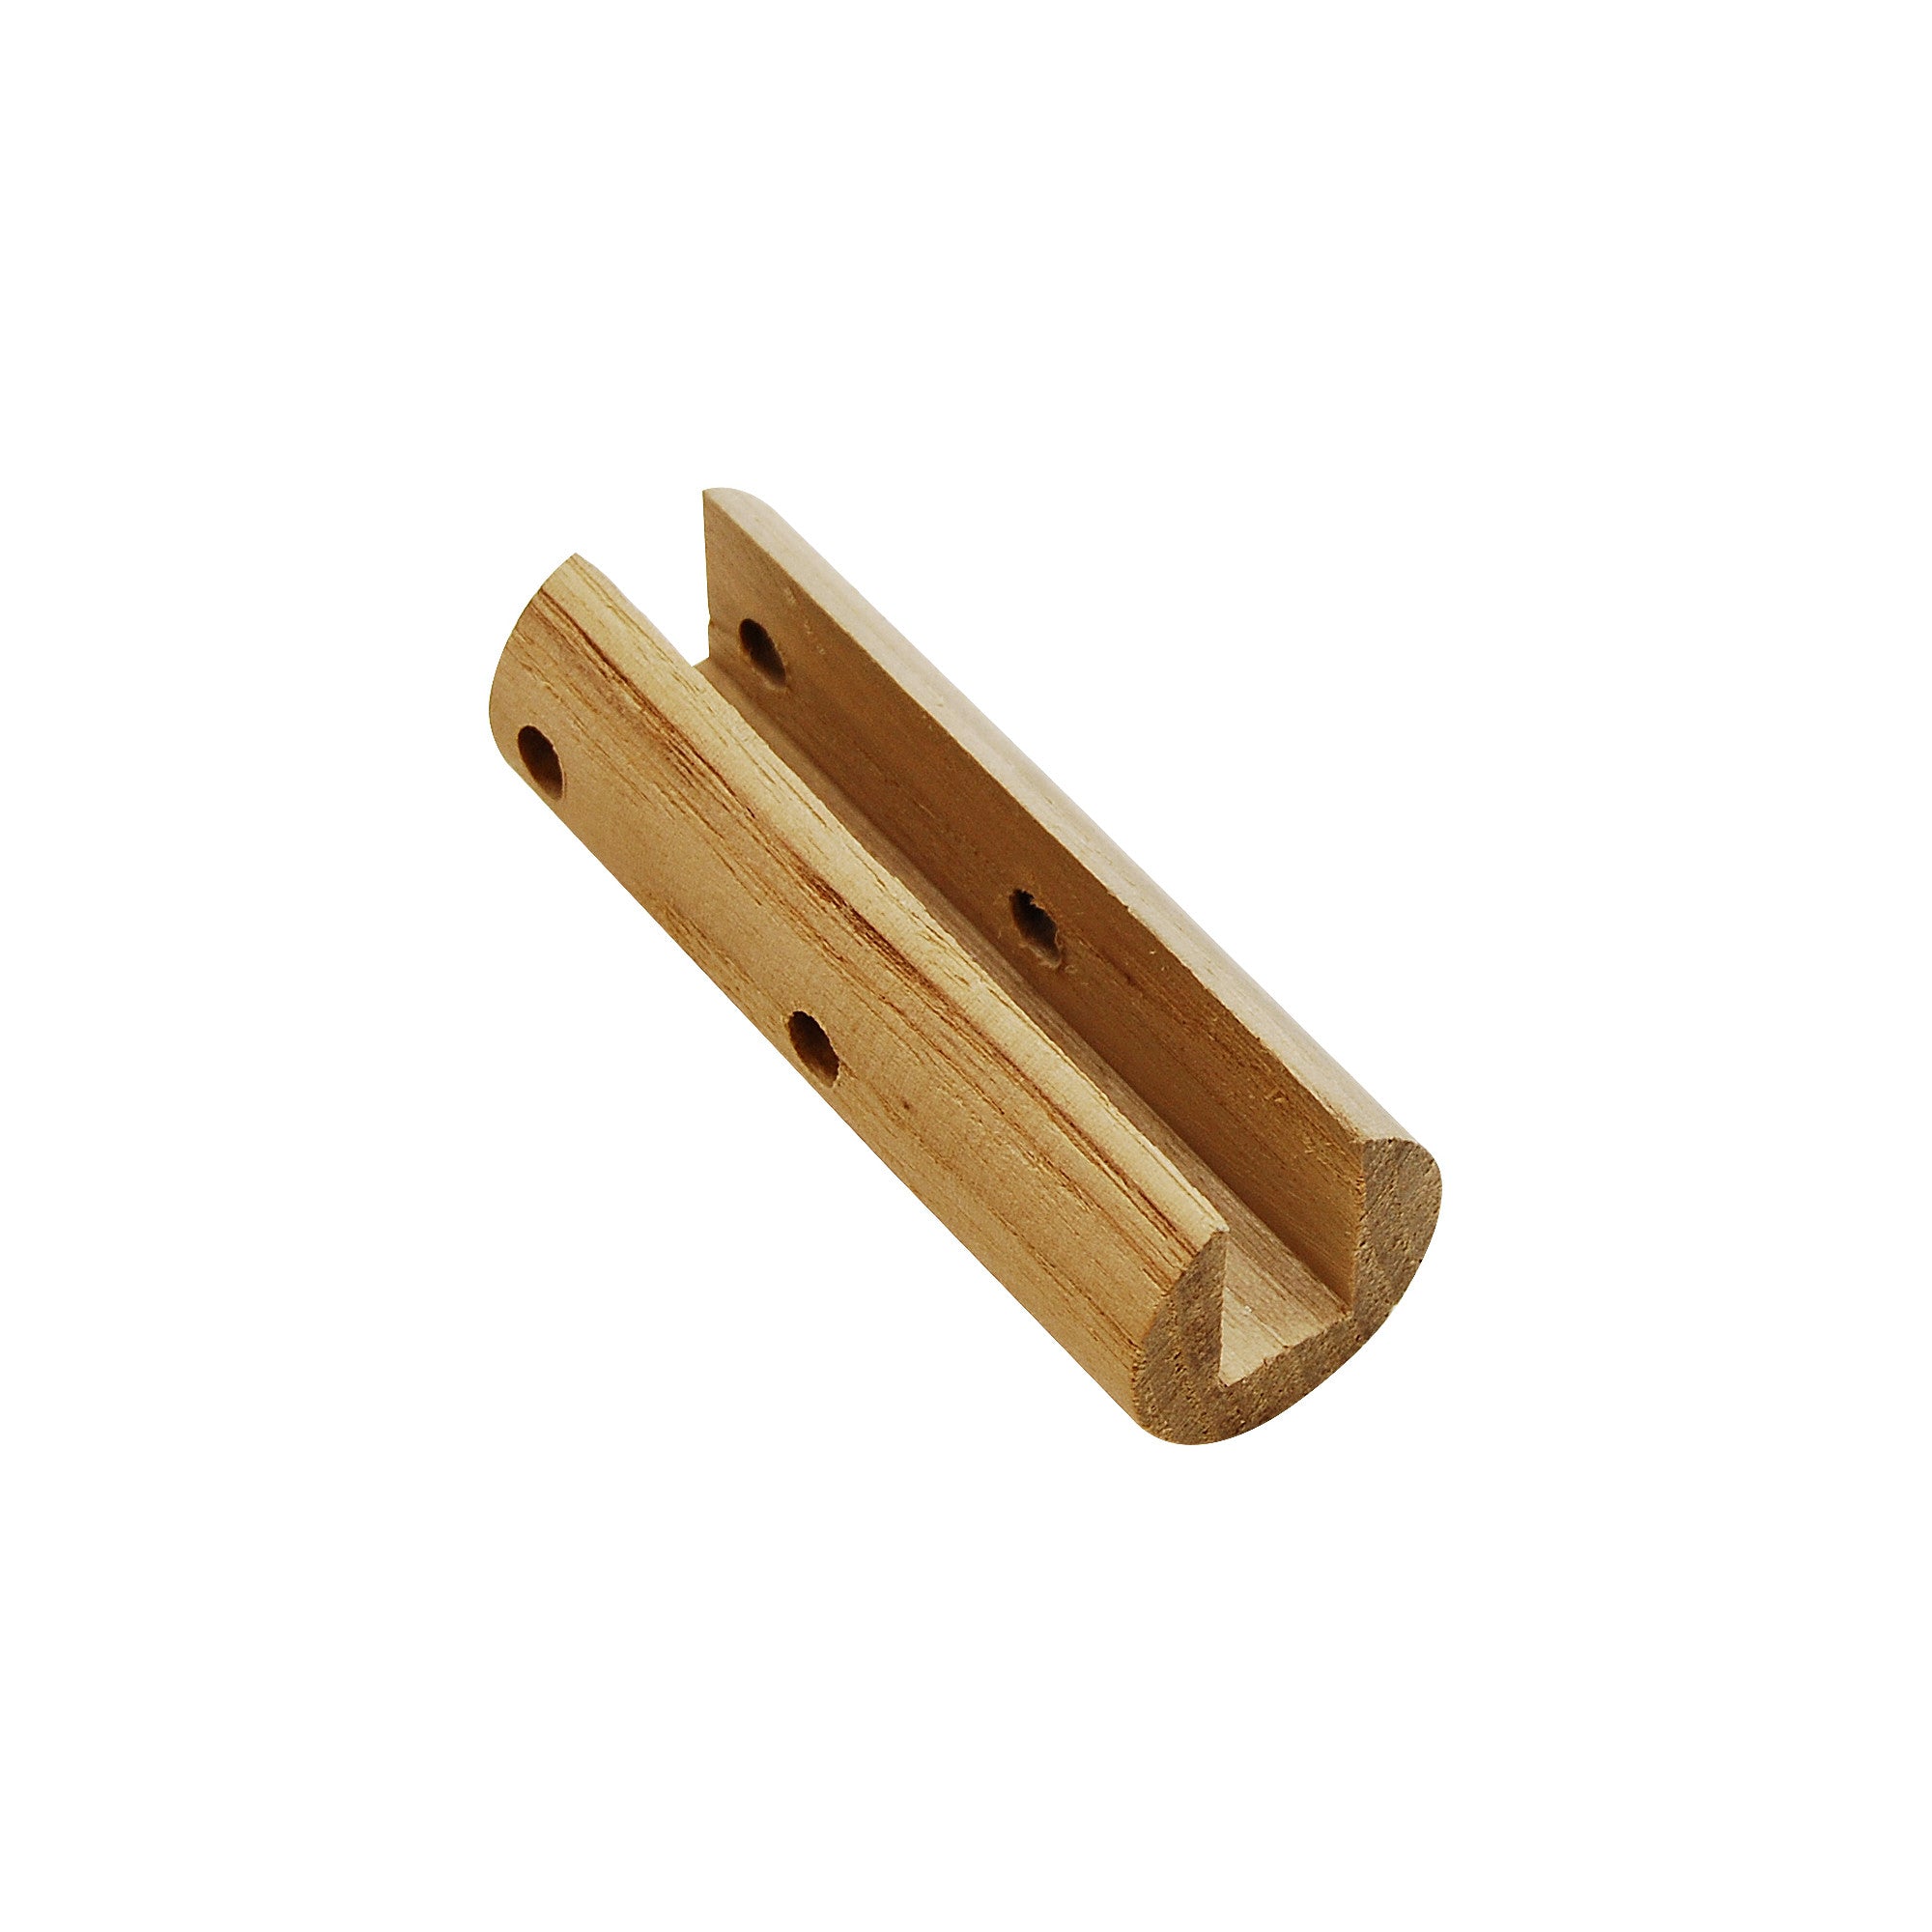 Replacement Wood Plug for Tree-Pruning System